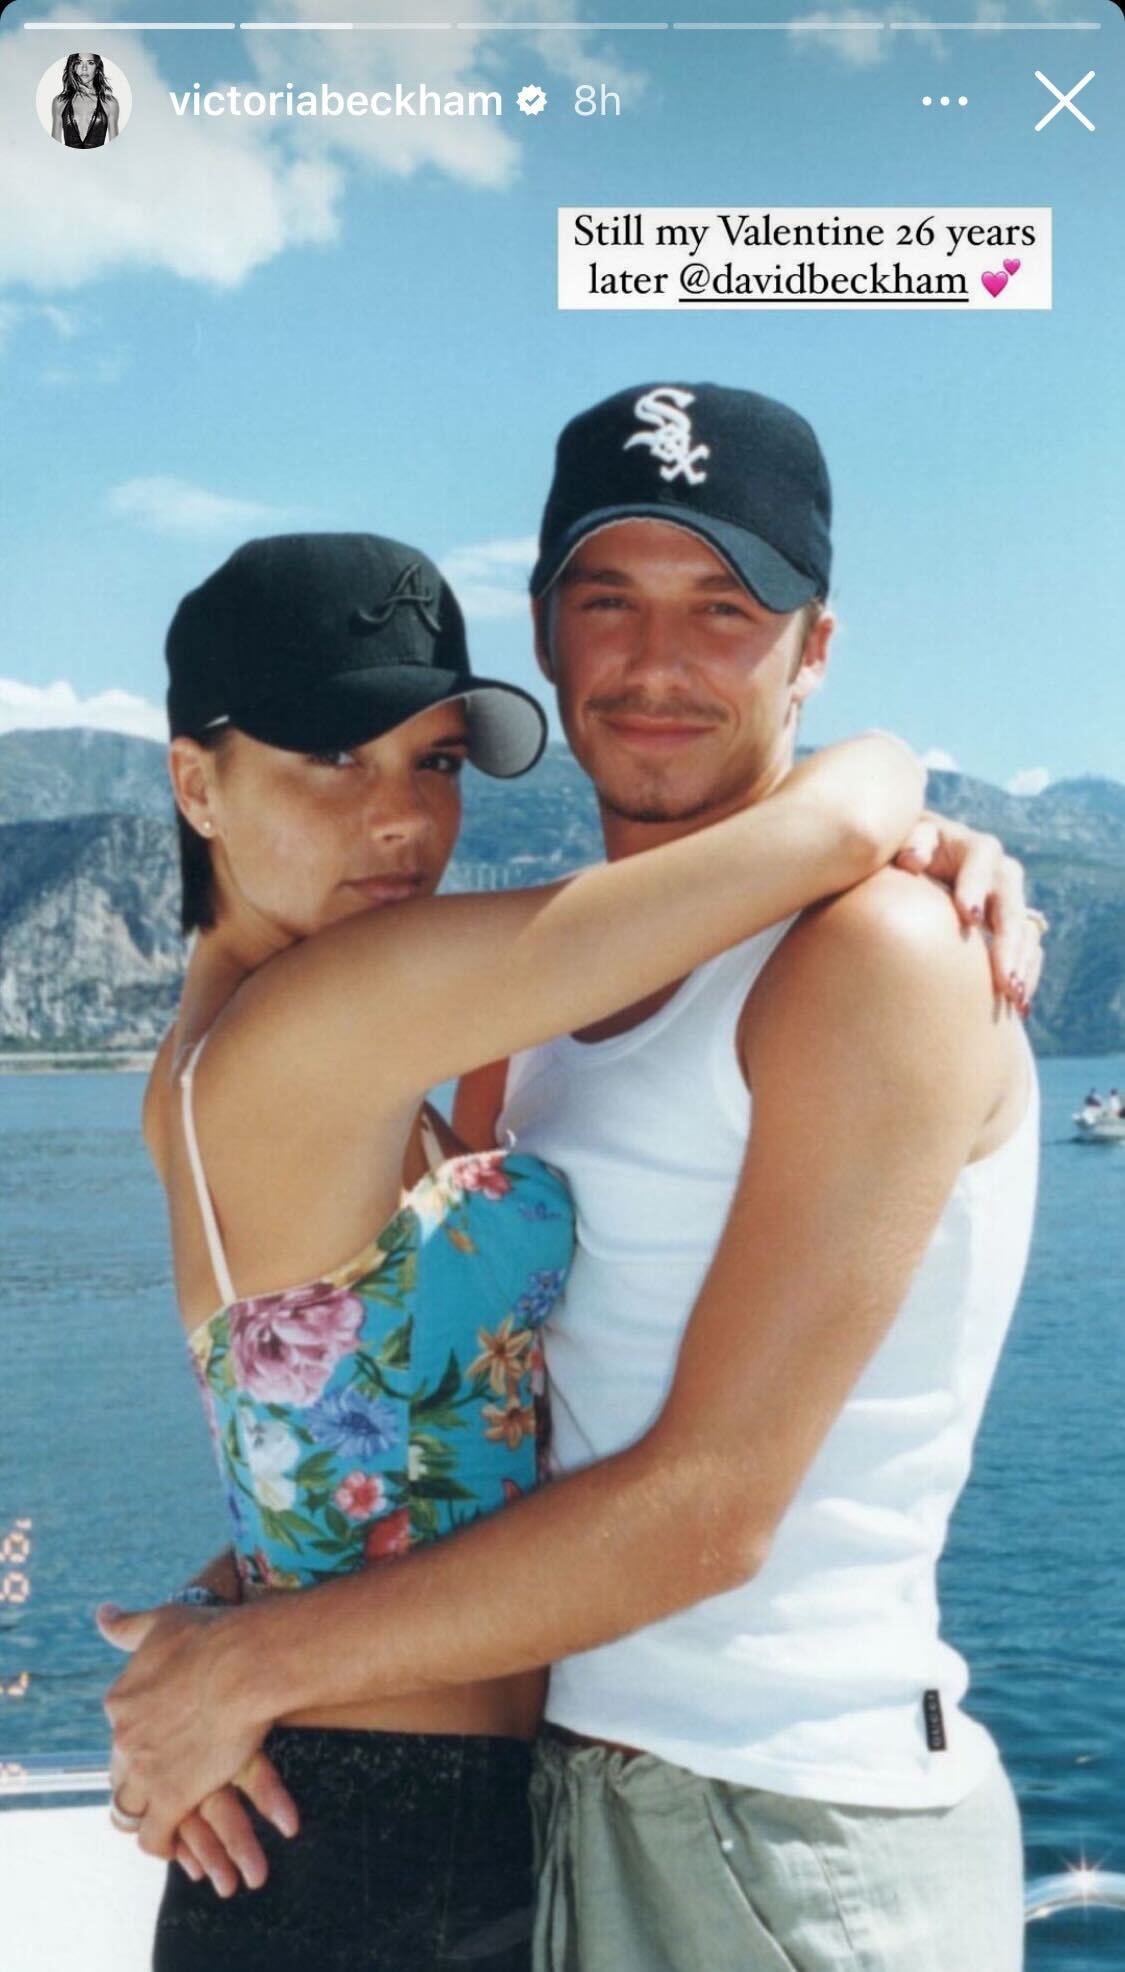 Victoria Beckham posted a throwback snap of her and David Beckham